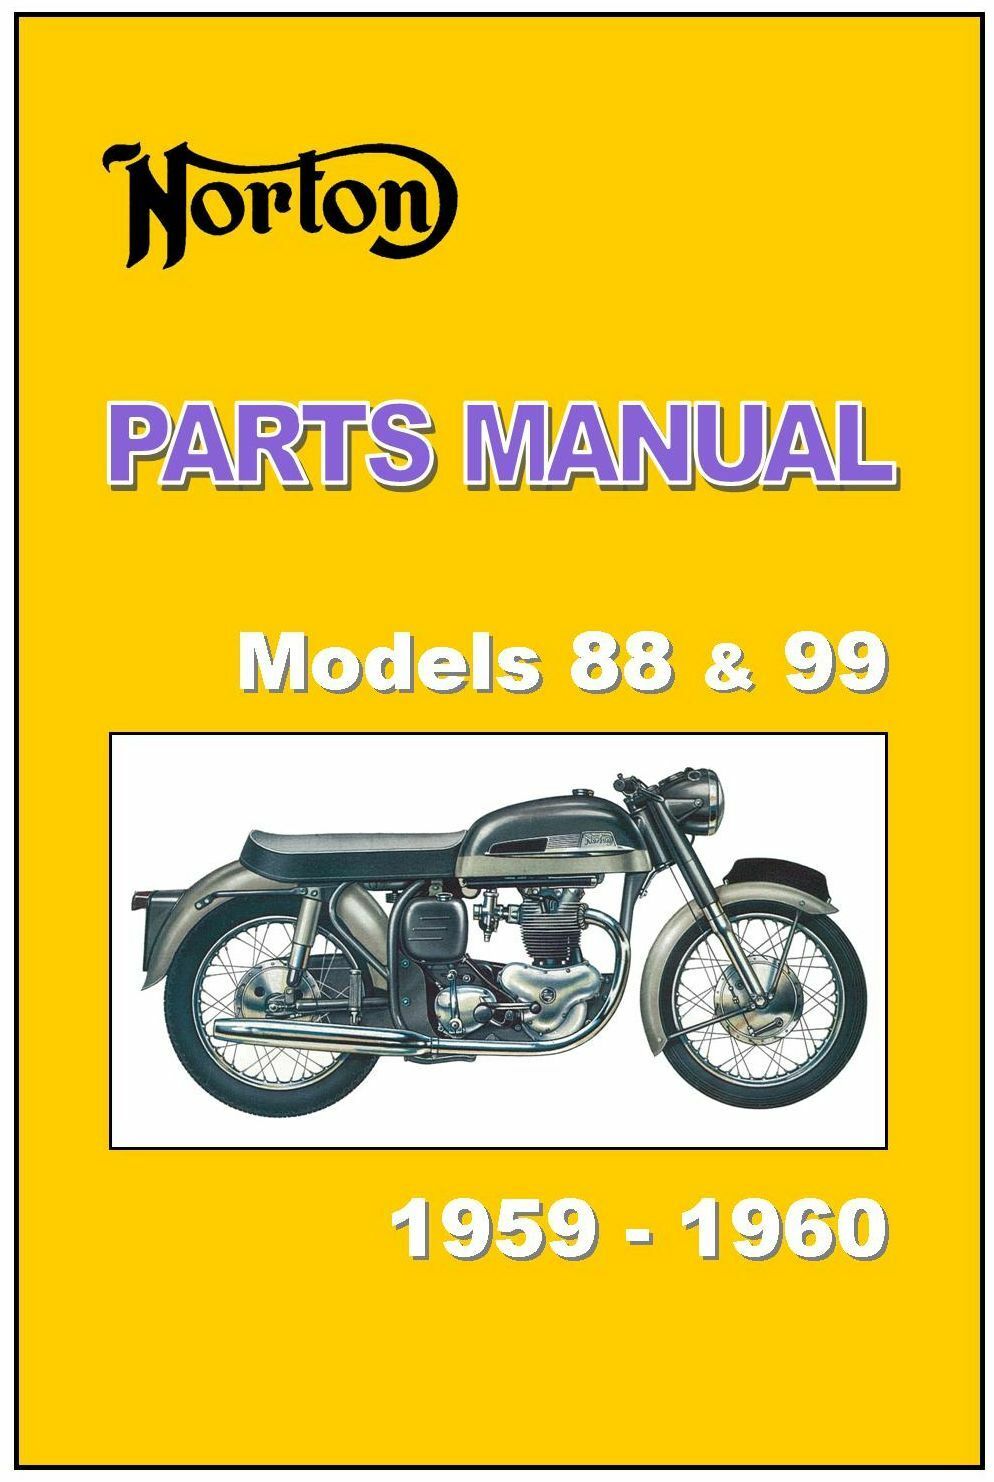 Looking for a parts + workshop manual for  1959 twin